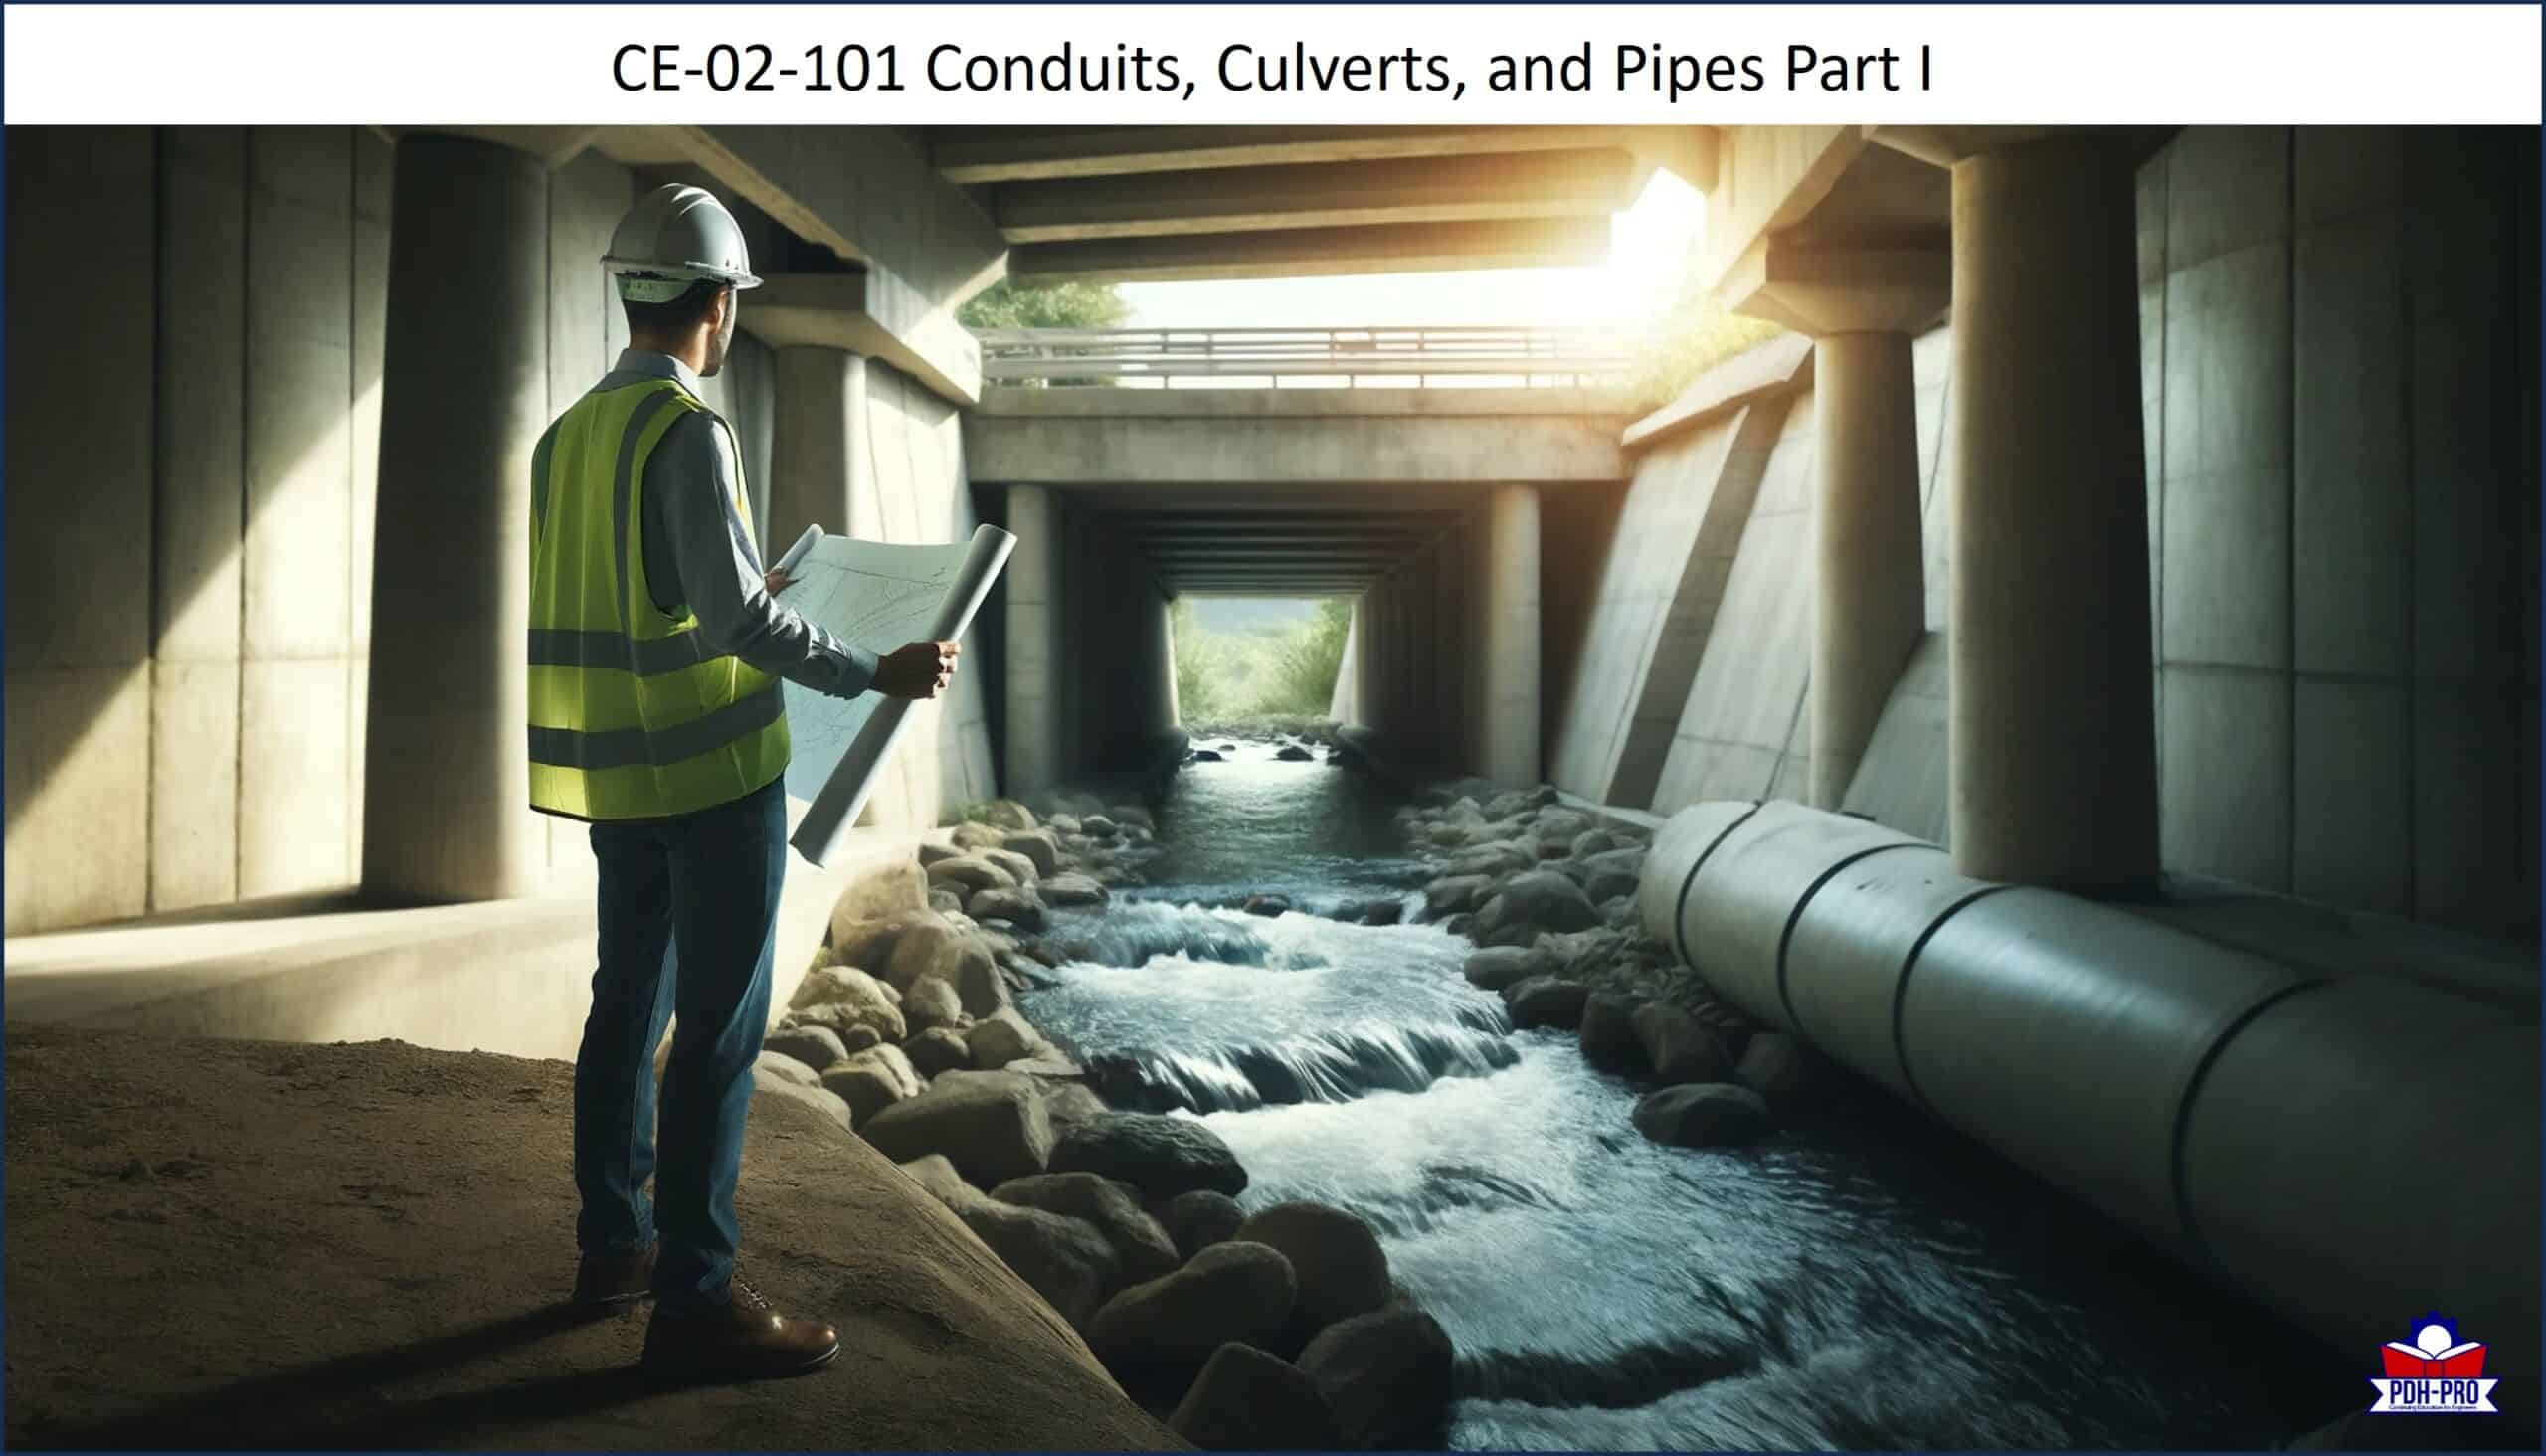 CE-02-101 Conduits, Culverts, and Pipes Part I